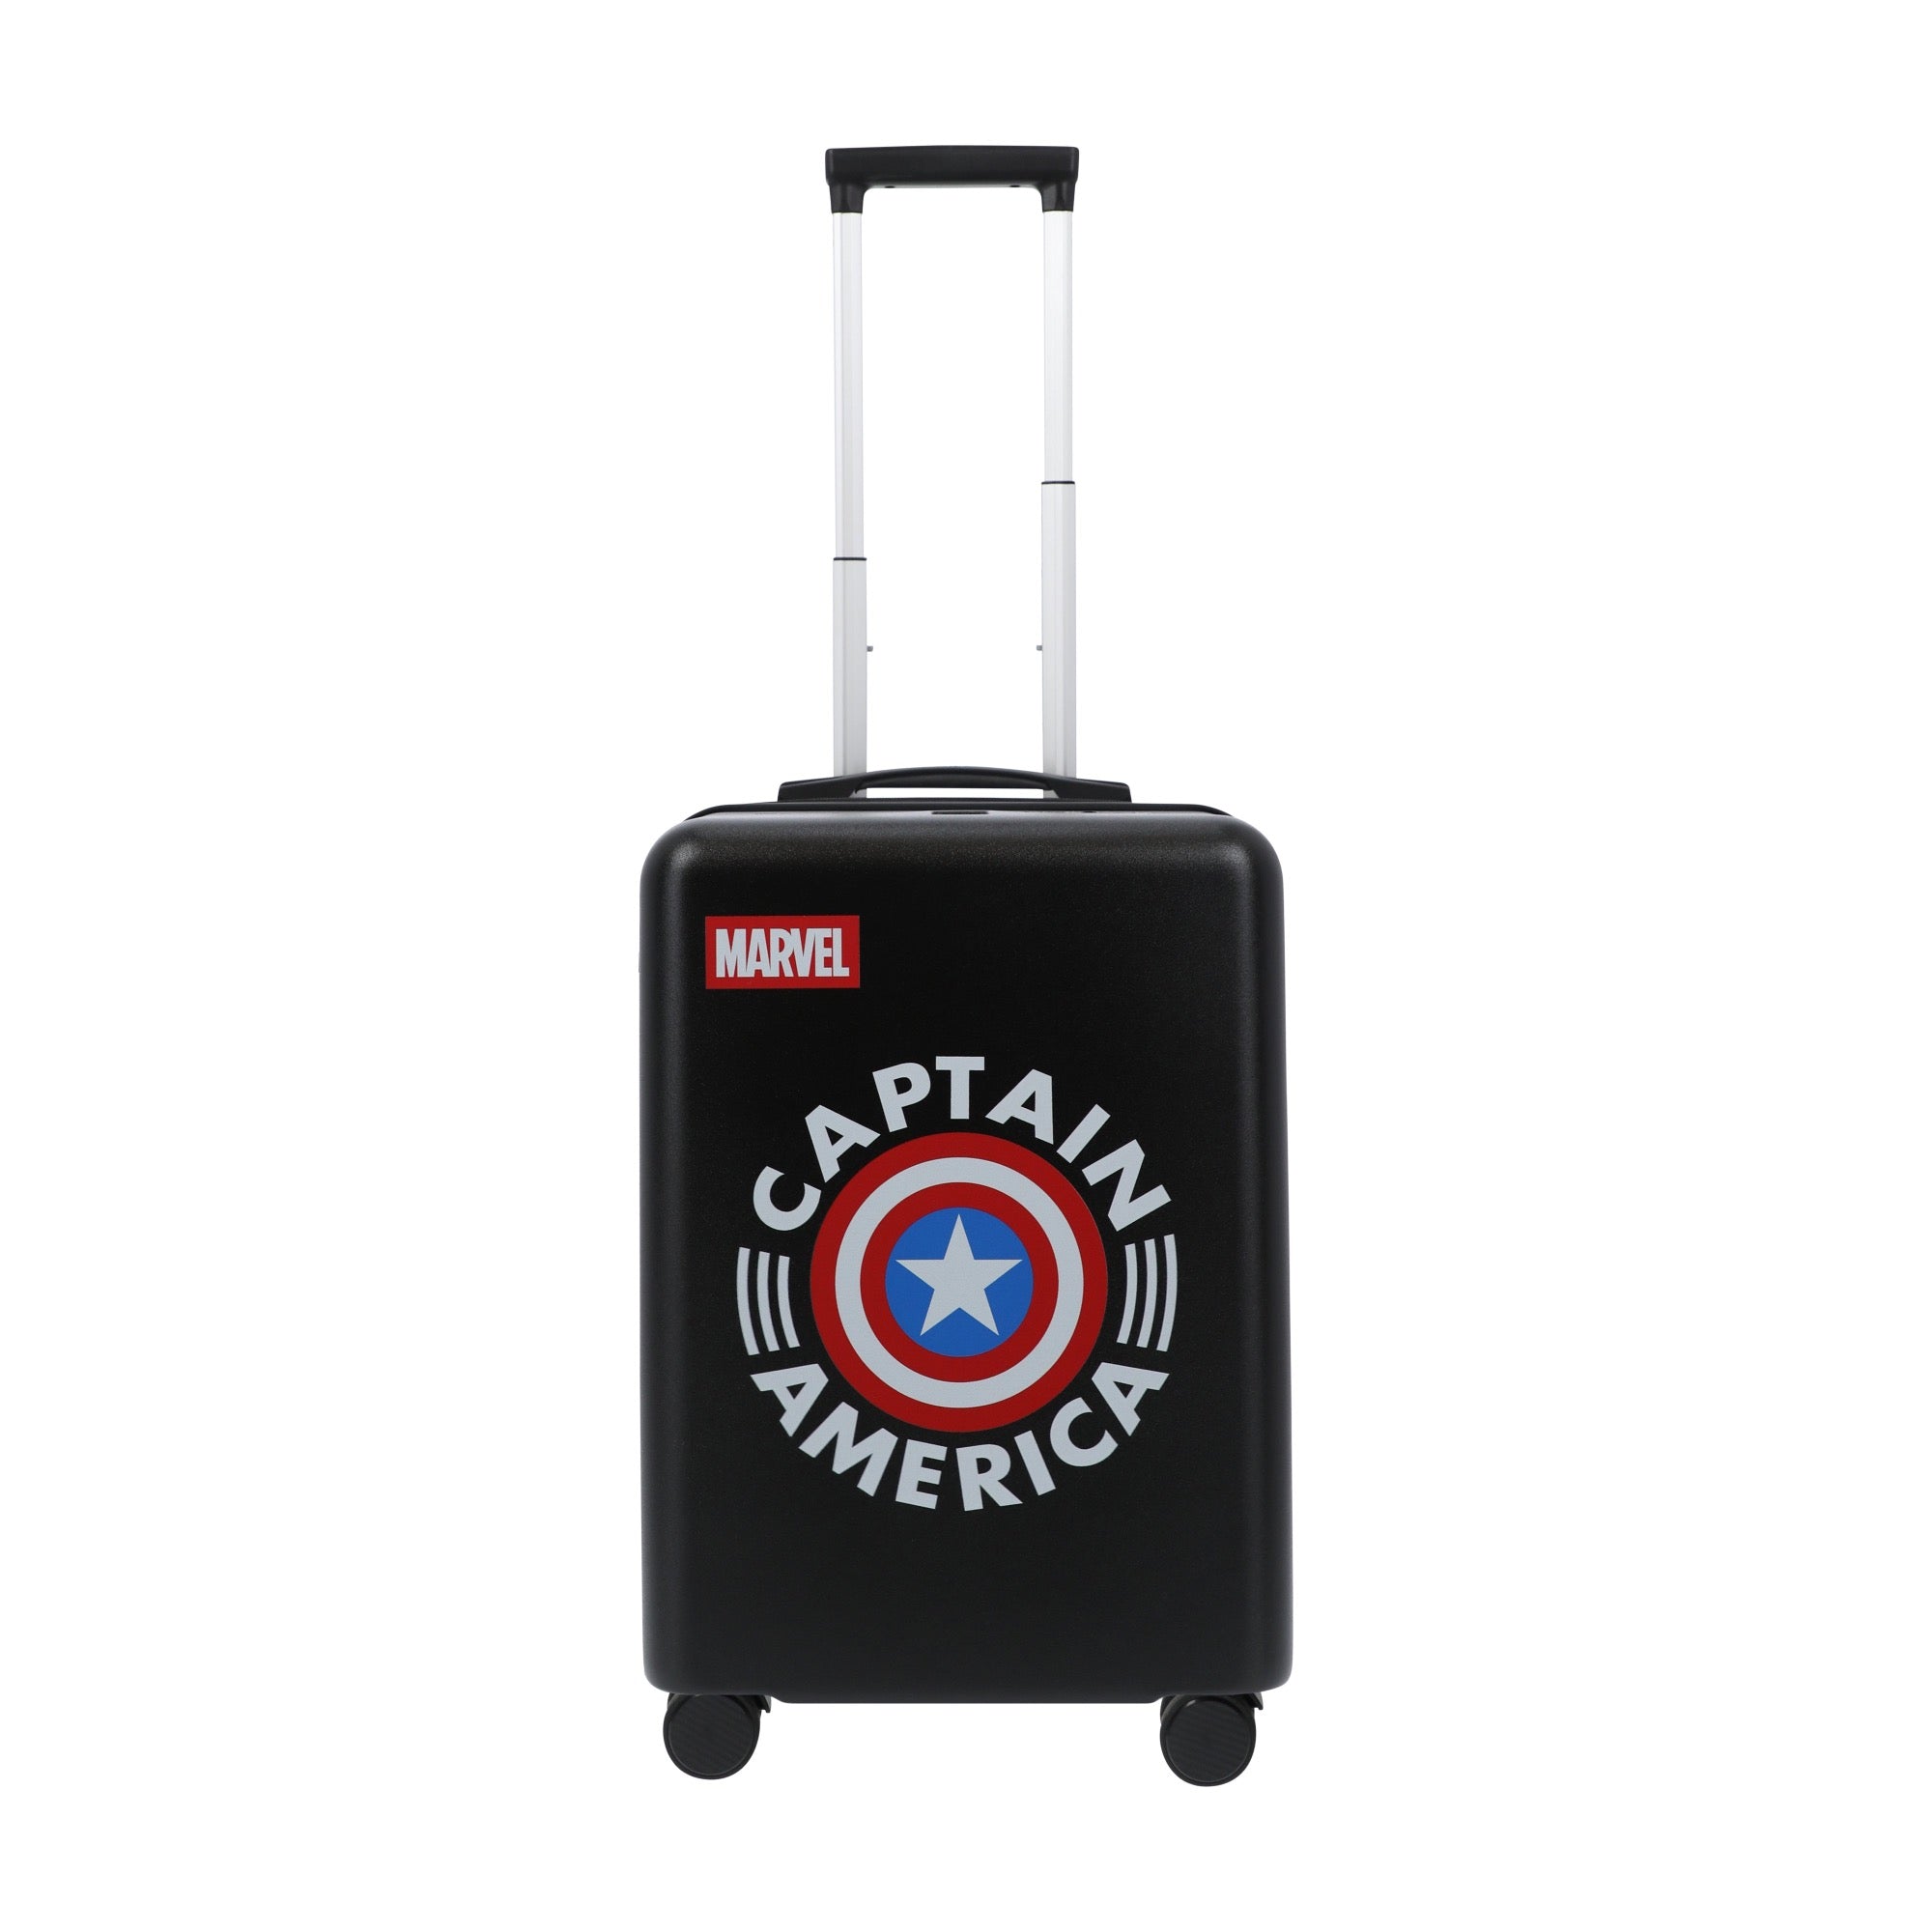 Black marvel captain america 22.5" carry-on spinner suitcase luggage by Ful